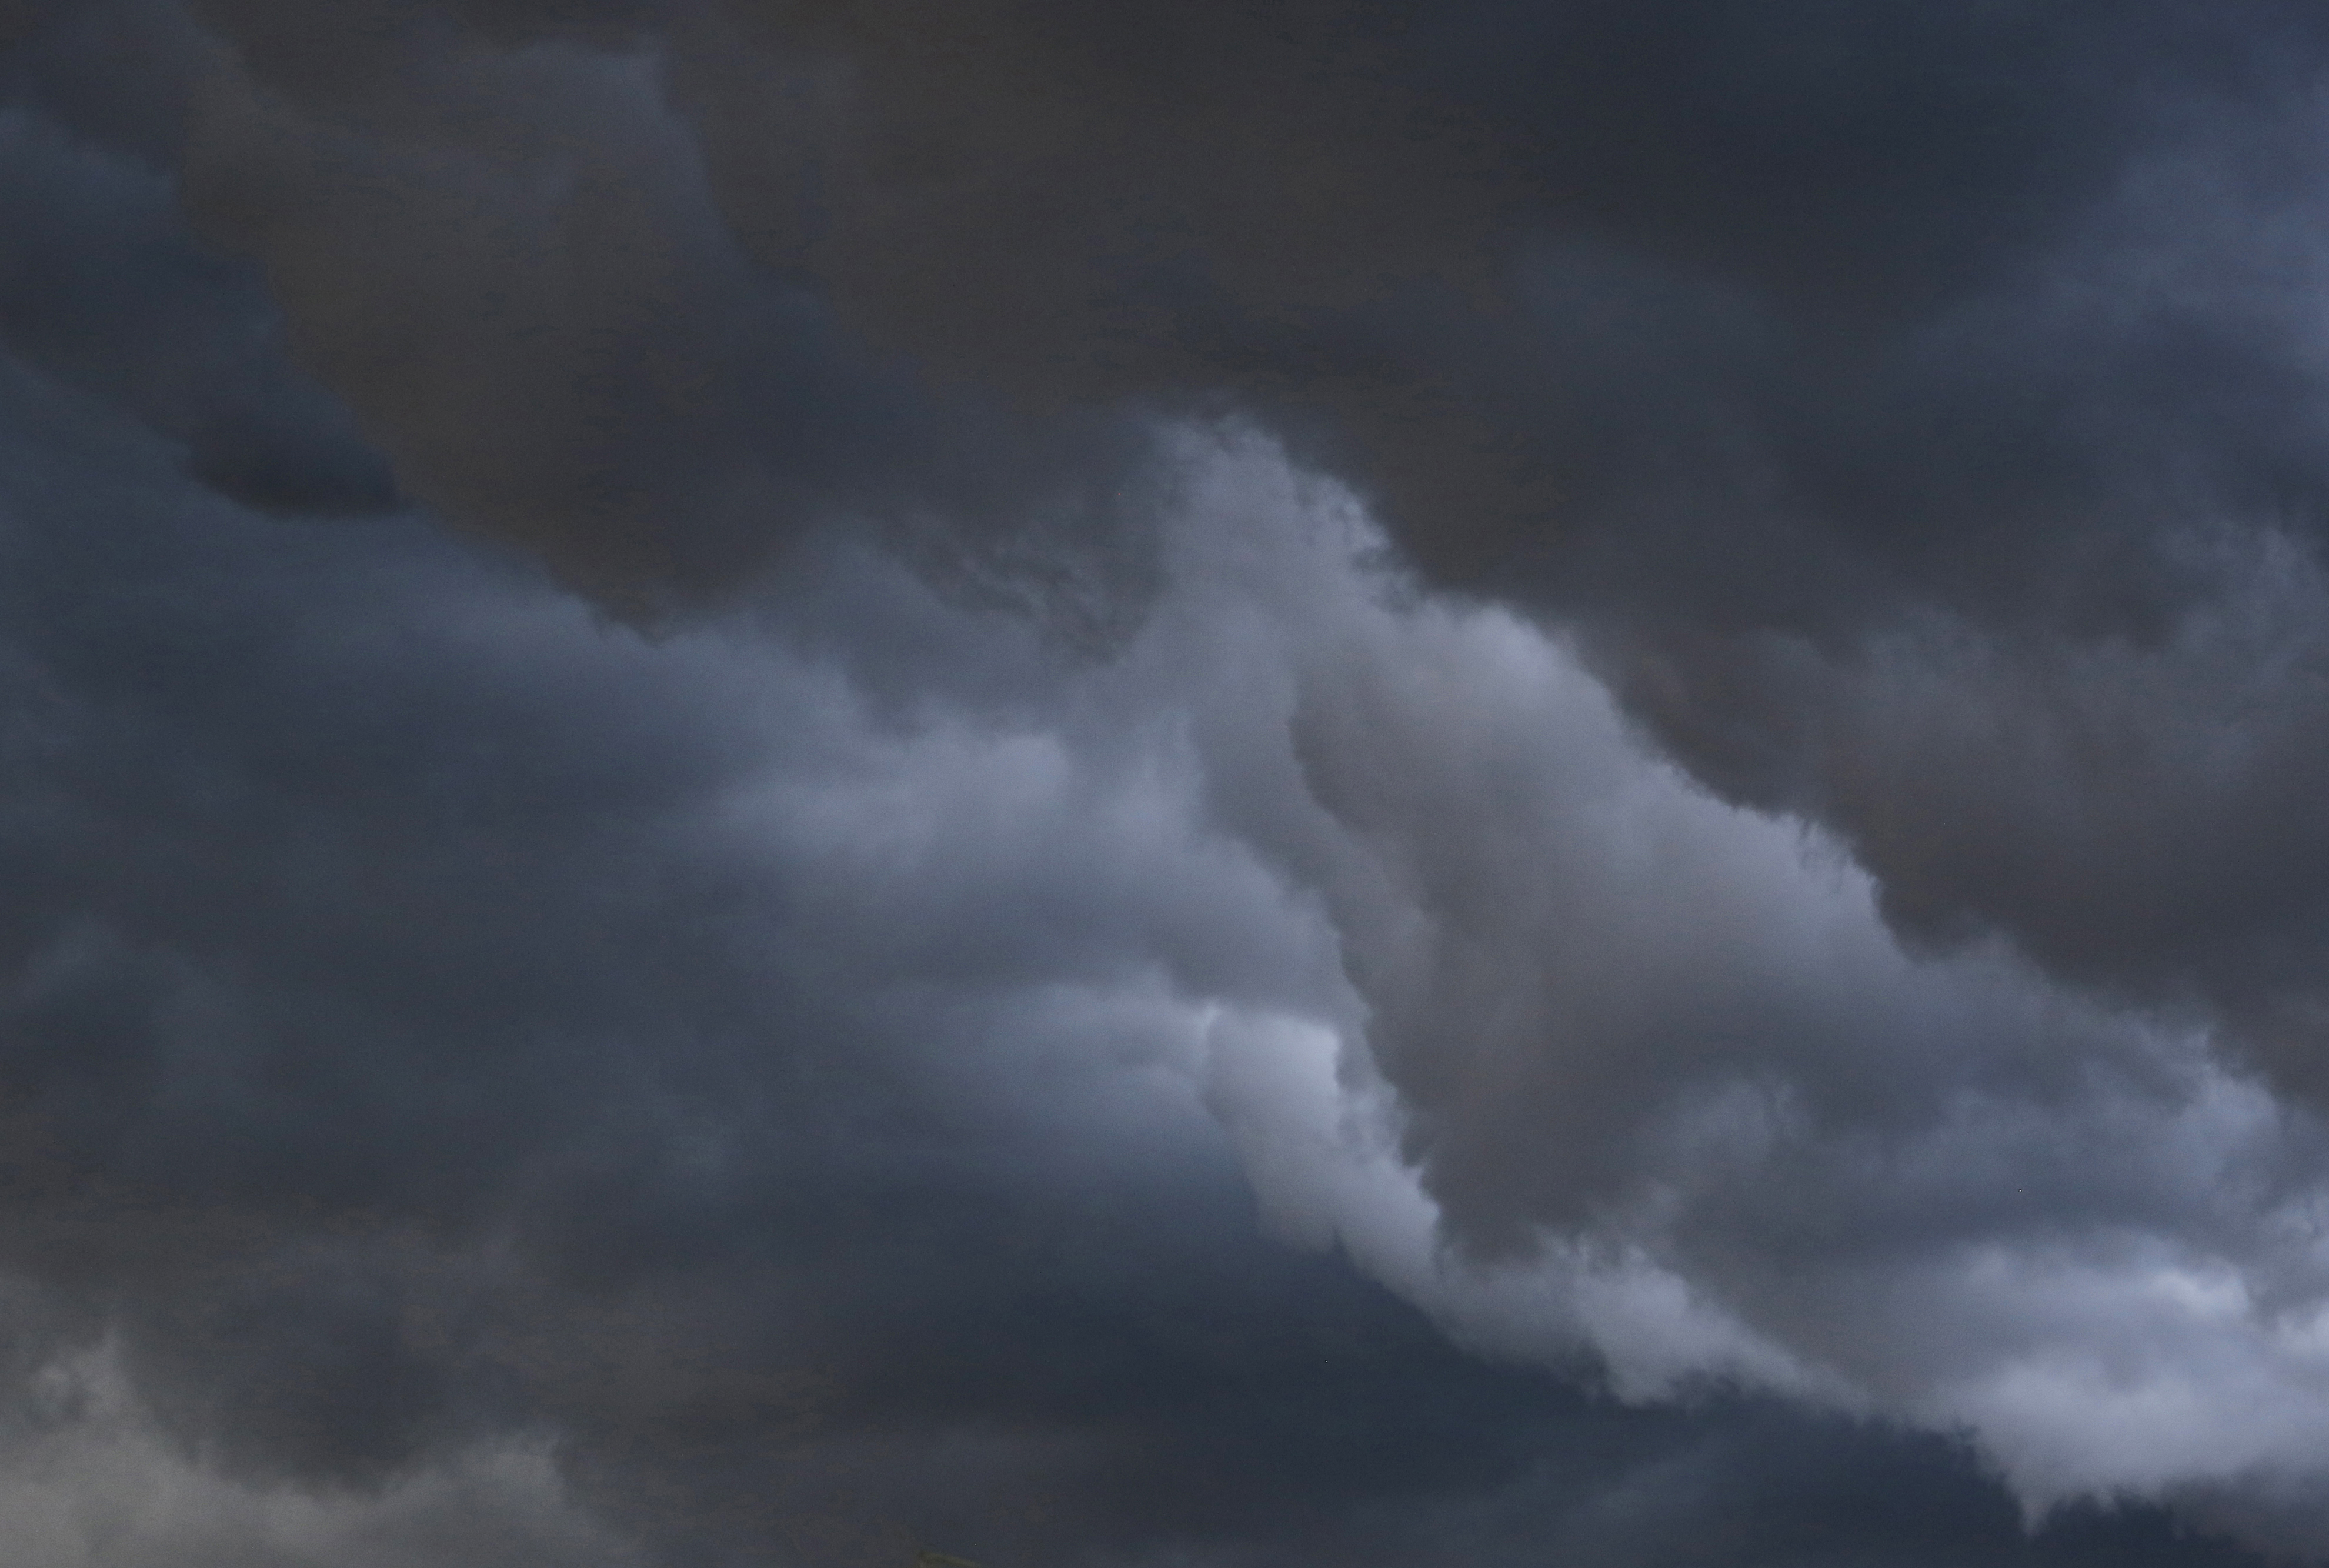 Severe thunderstorm warning in effect for parts of central,
southwestern Ontario